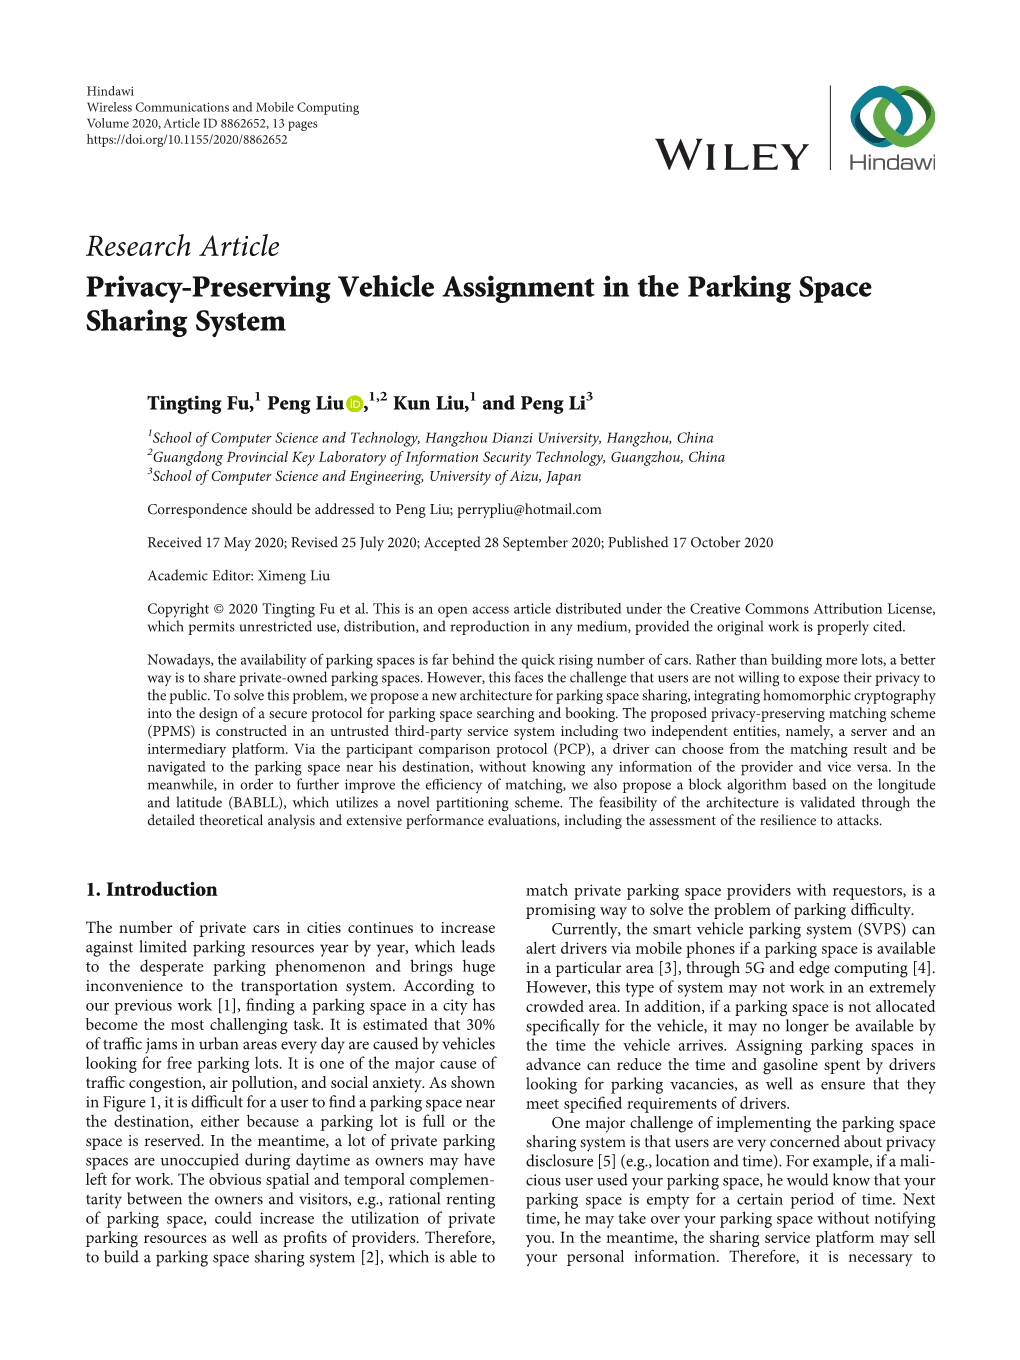 Research Article Privacy-Preserving Vehicle Assignment in the Parking Space Sharing System